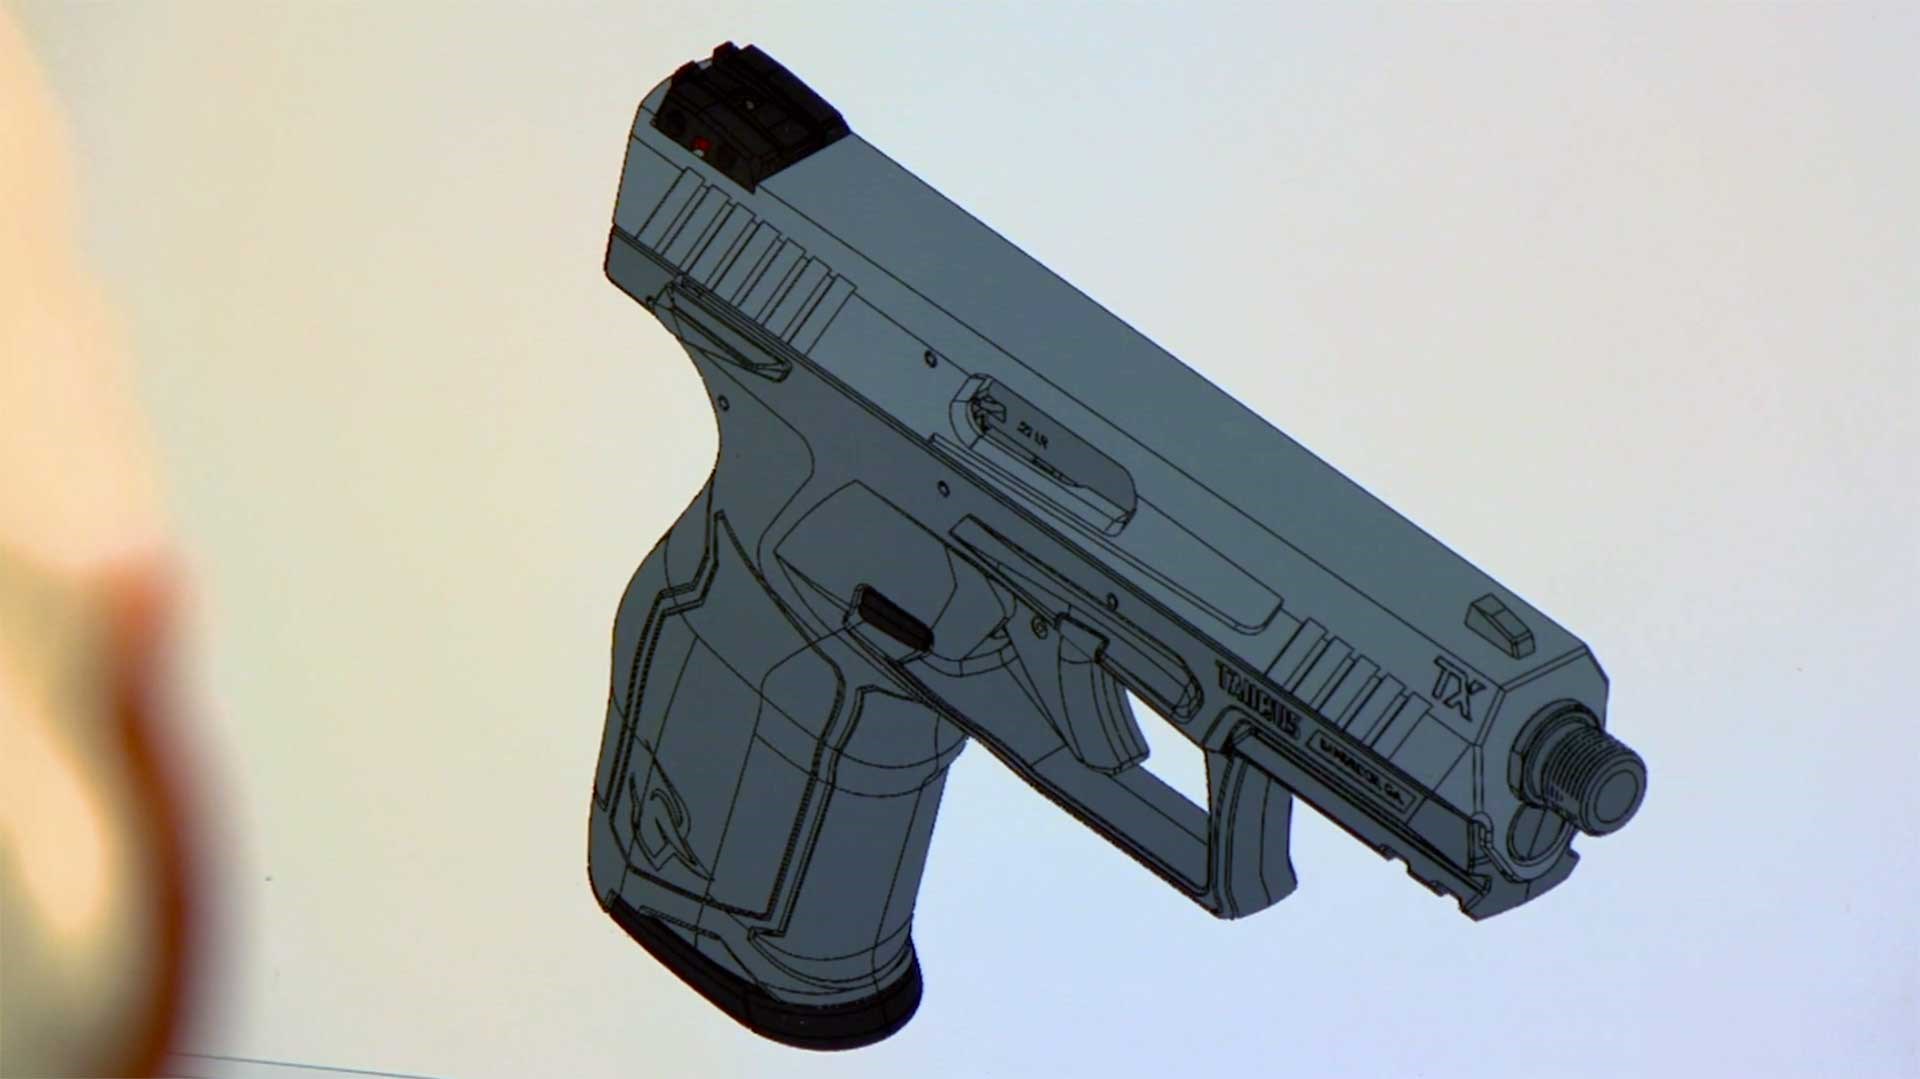 A 3D graphic rendering of a Taurus TX22 pistol on a computer screen.